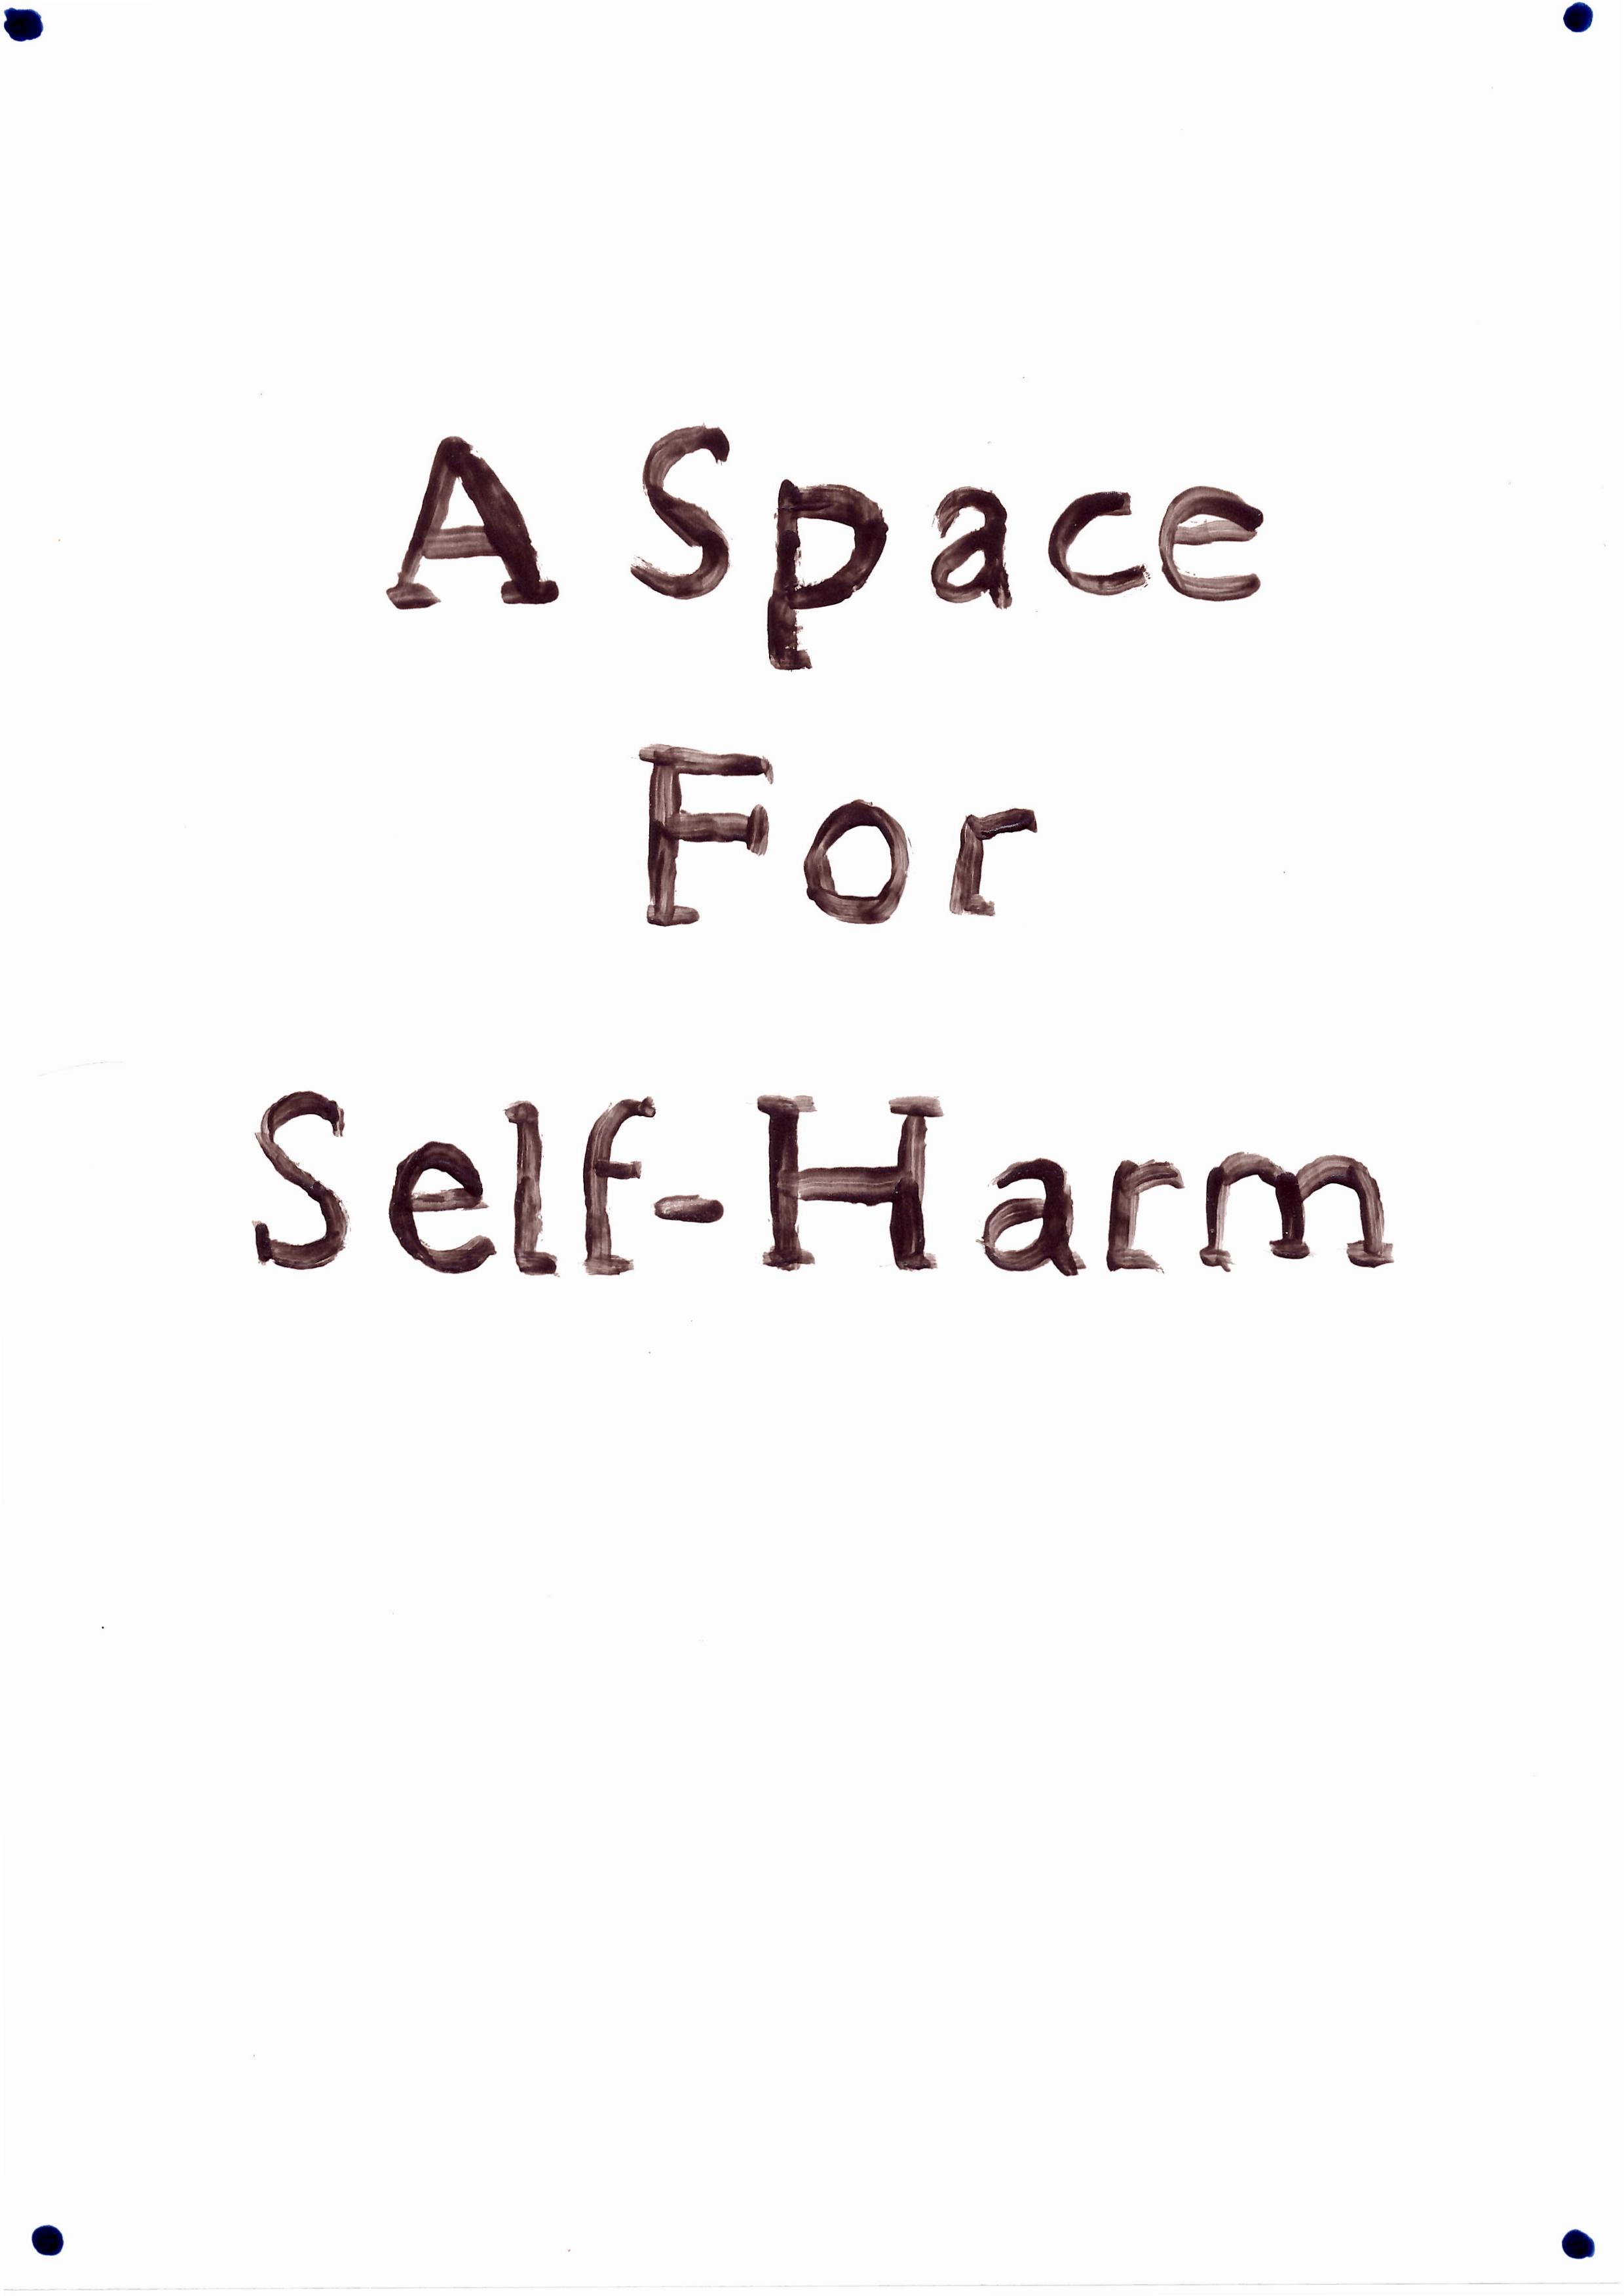 Front cover image with text 'A Space for Self-Harm'